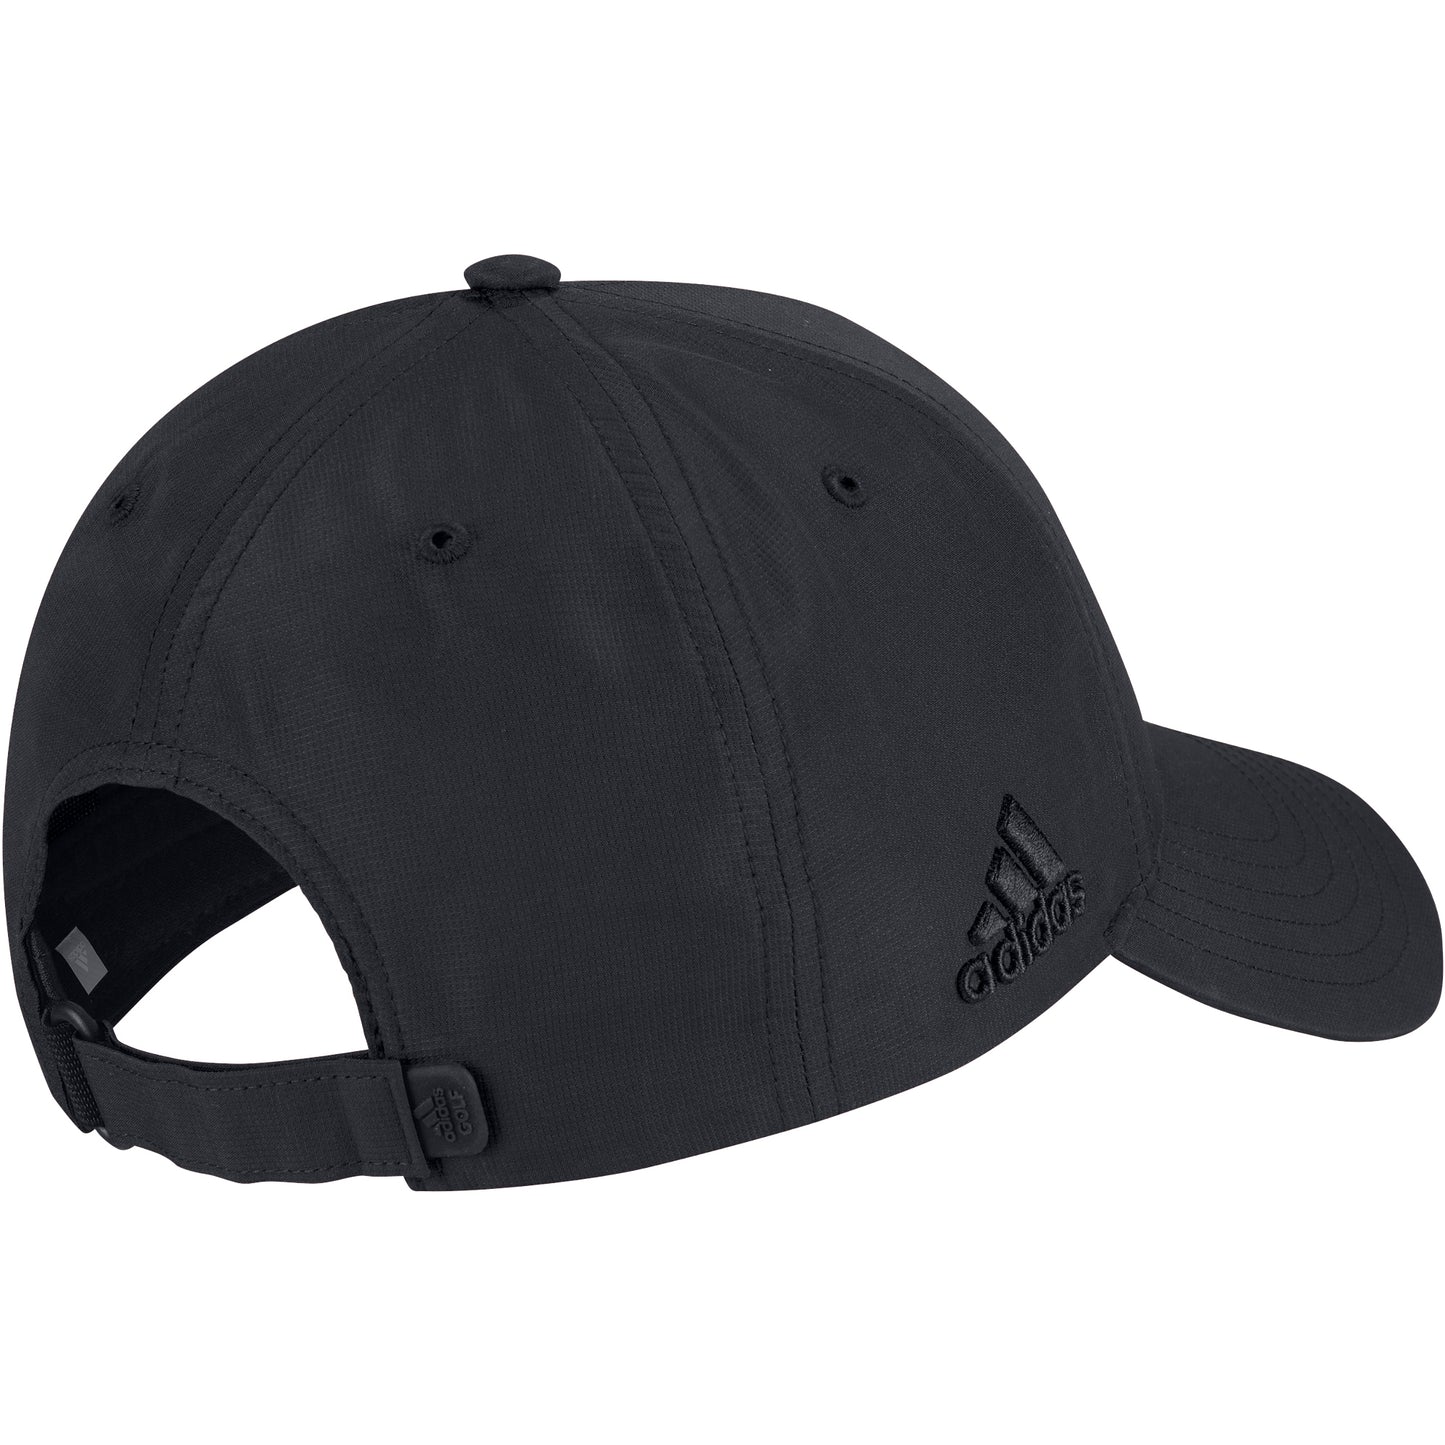 Team – Hat Performance Products Crestable Golf